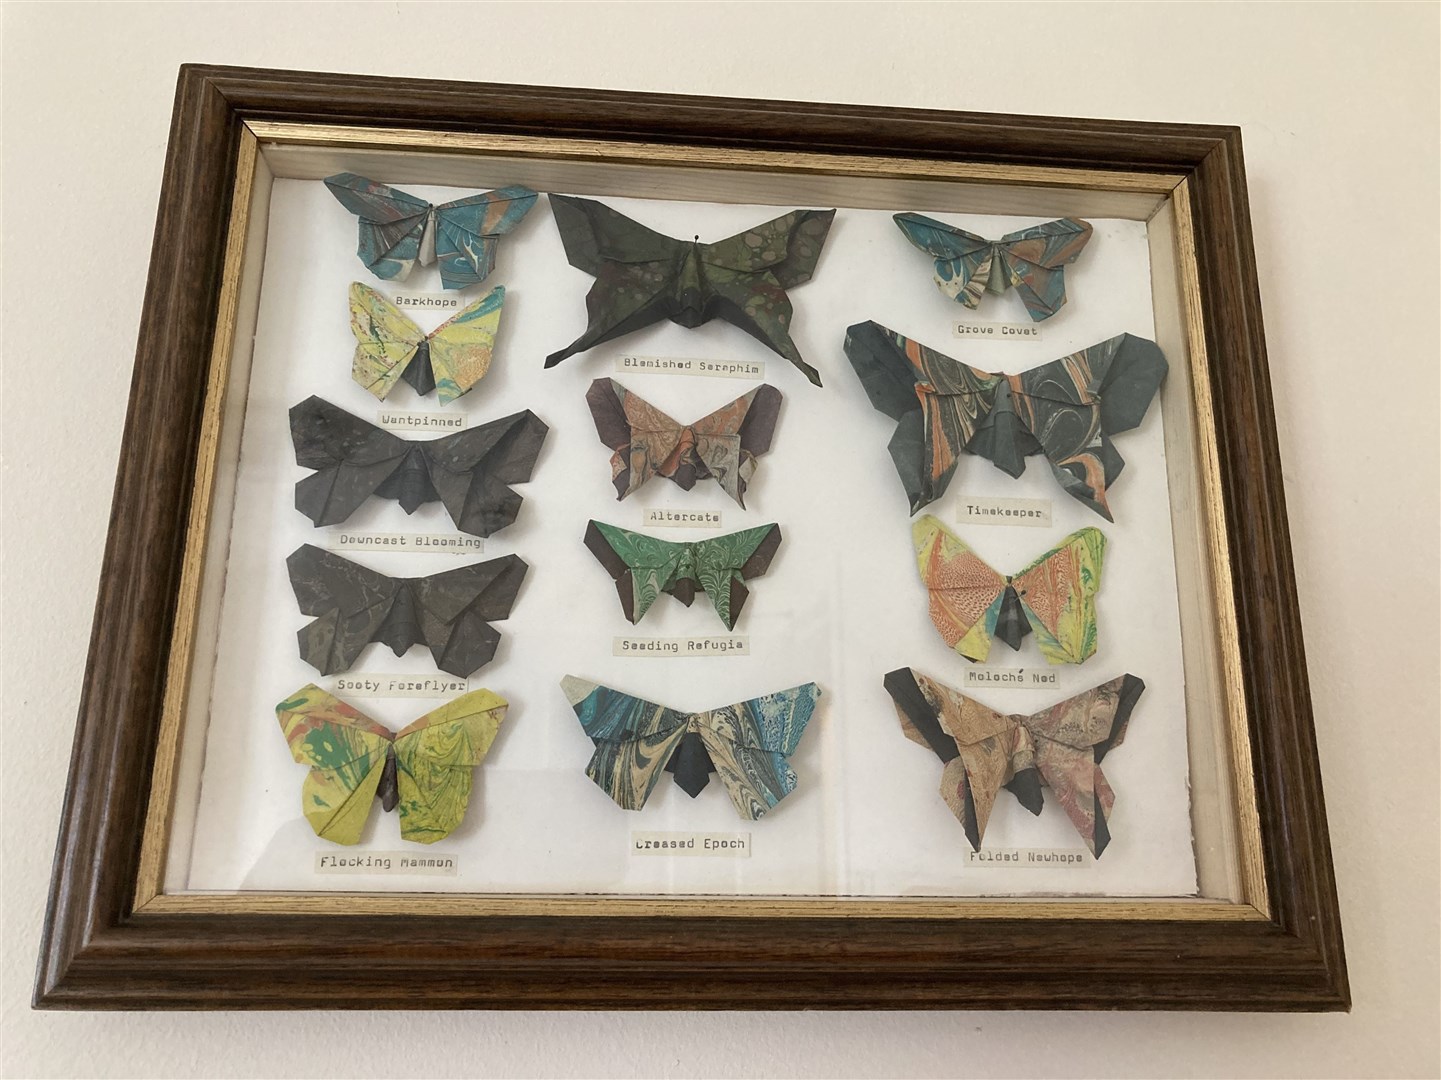 Sir Christopher Spink, an artist who created butterfly origami sculptures from his home in the Highlands.